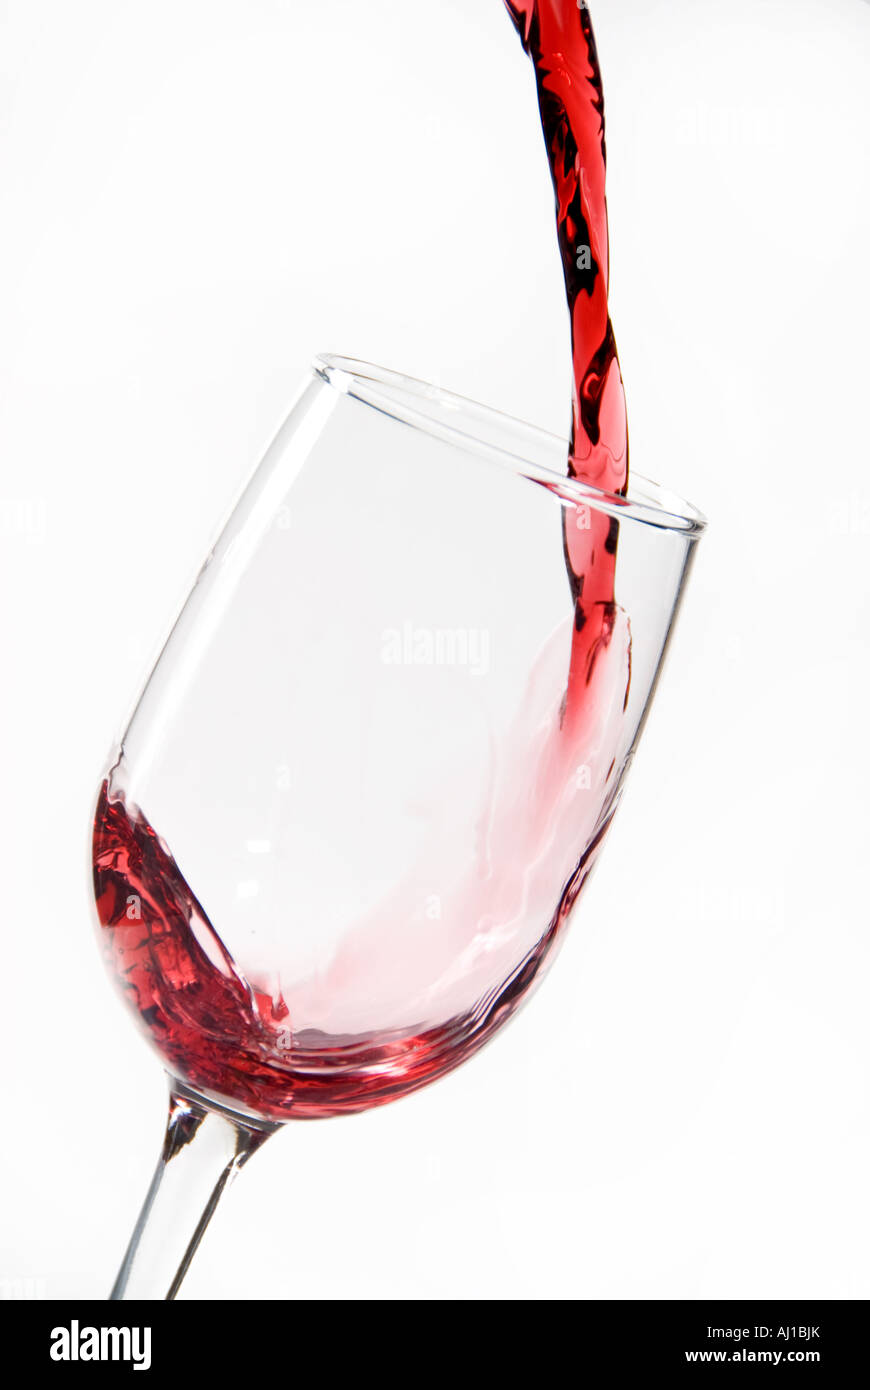 Blood red wine being poured into a clear wine glass for sipping at happy hour Stock Photo